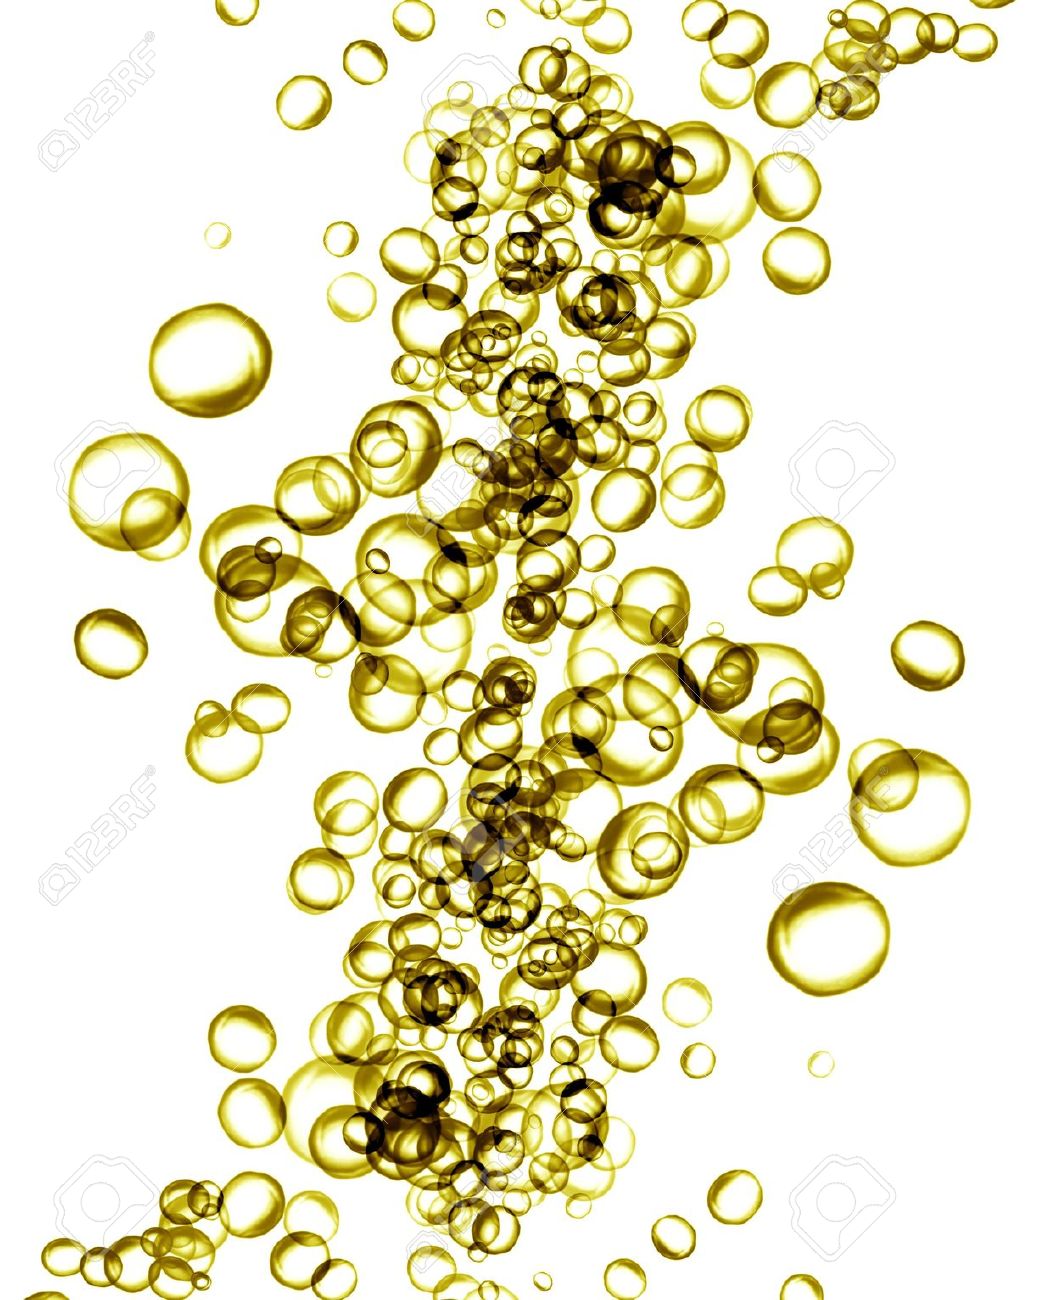 Golden Water Bubbles On A White Background Stock Photo, Picture.